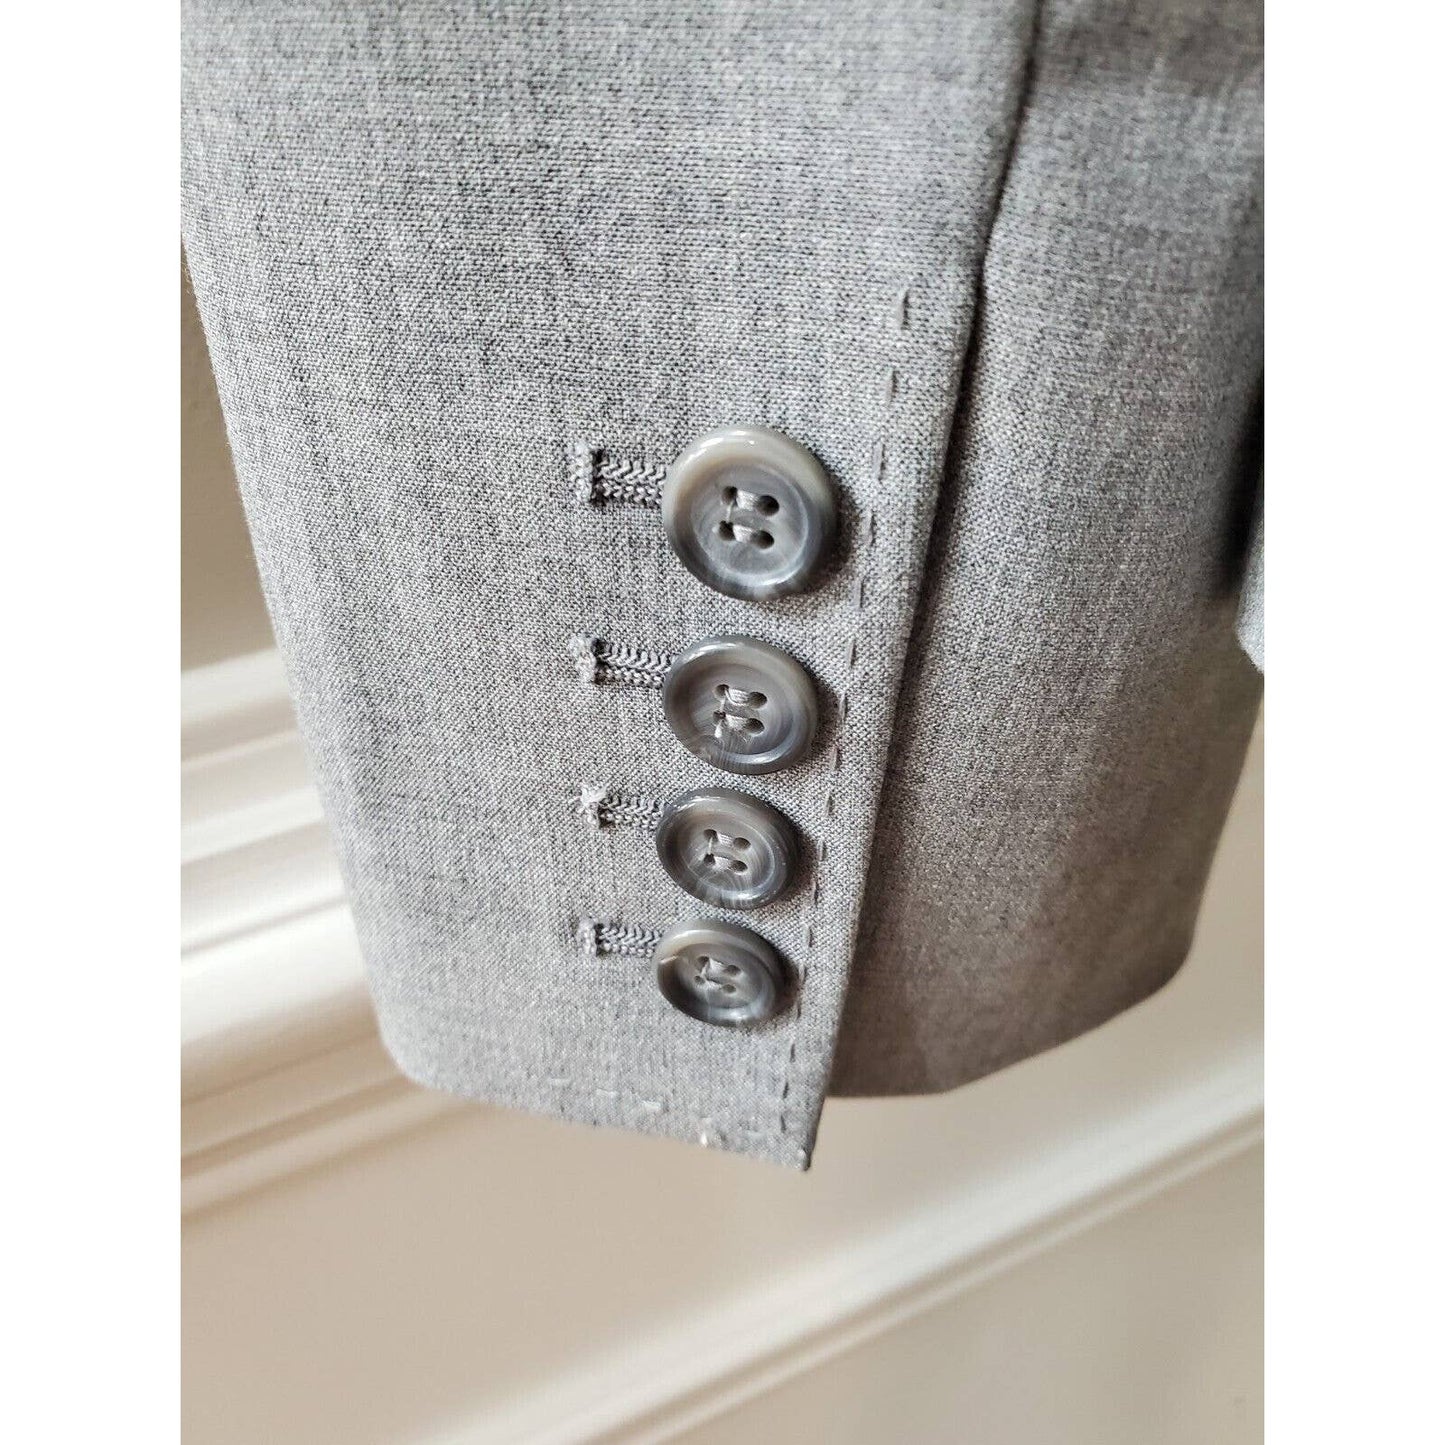 The Limited Women's Gray Polyester Single Breasted Long Sleeve Blazer Size 8